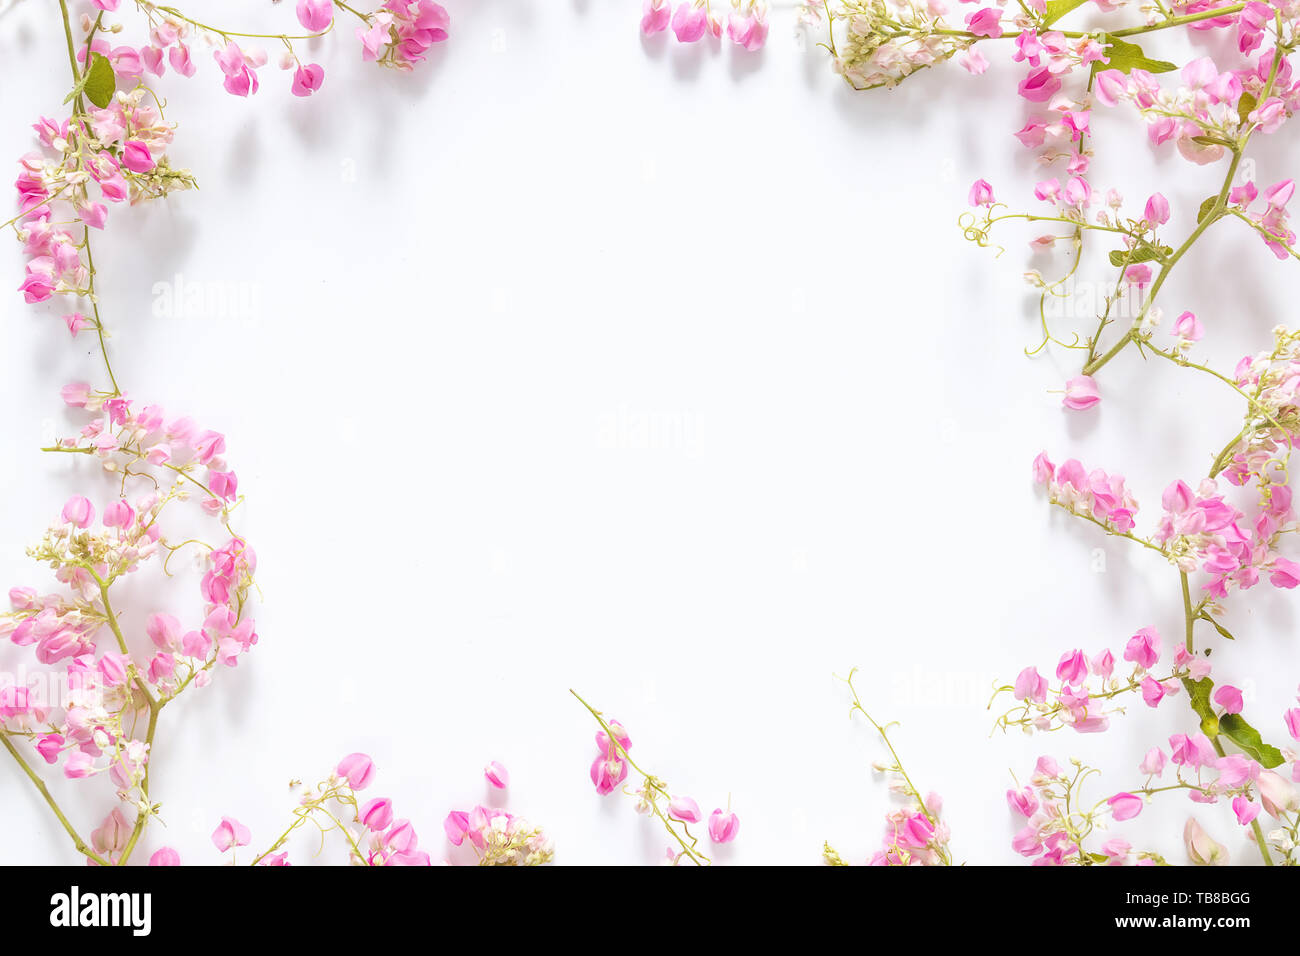 square border frame with pink flower , branches and leaves isolated on white background with copy space. flat lay, top view Stock Photo